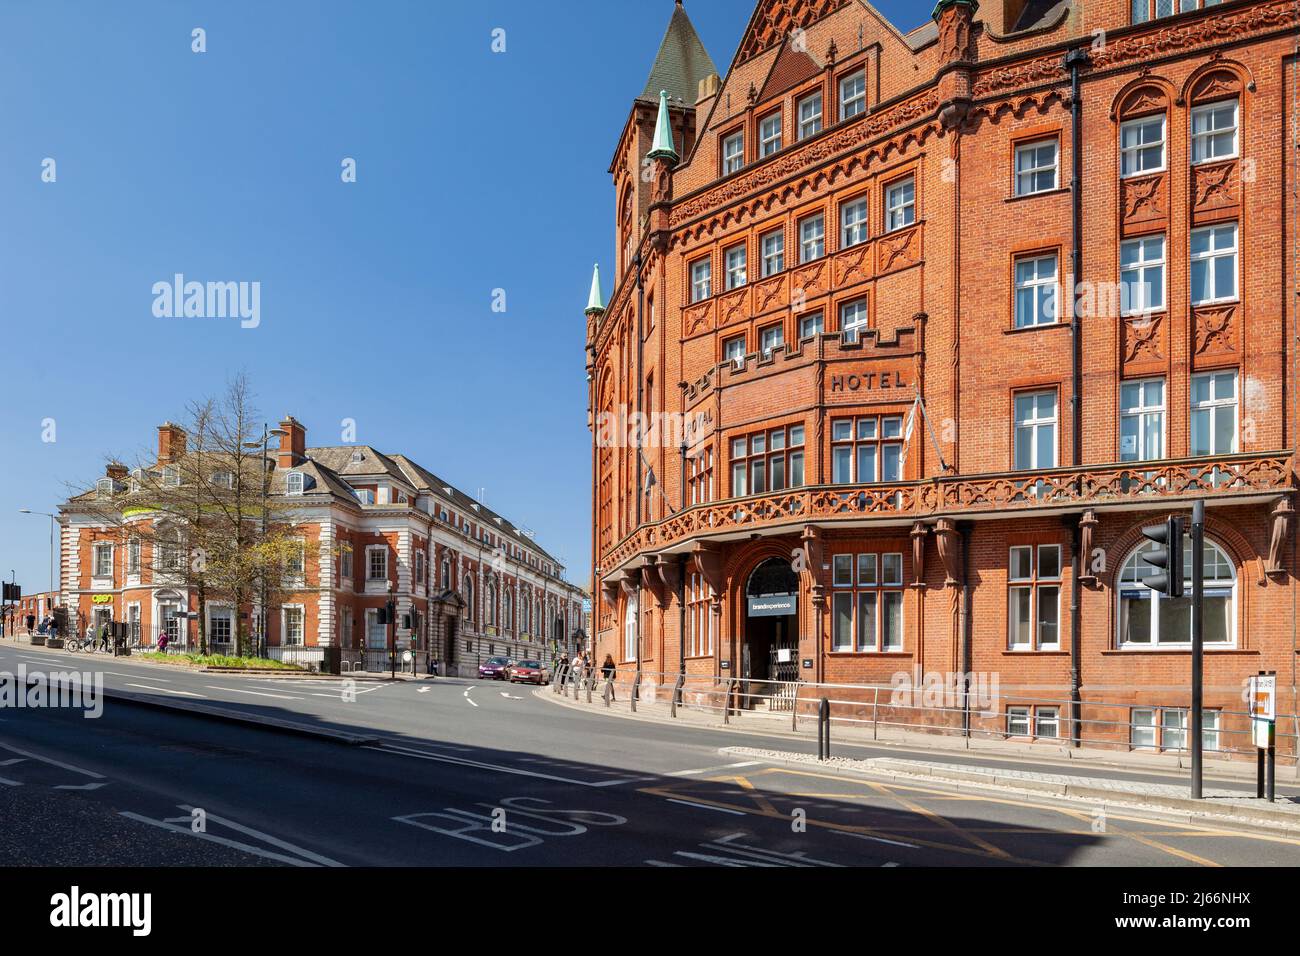 Royal Hotel in Norwich city centre, Norfolk, England. Stock Photo